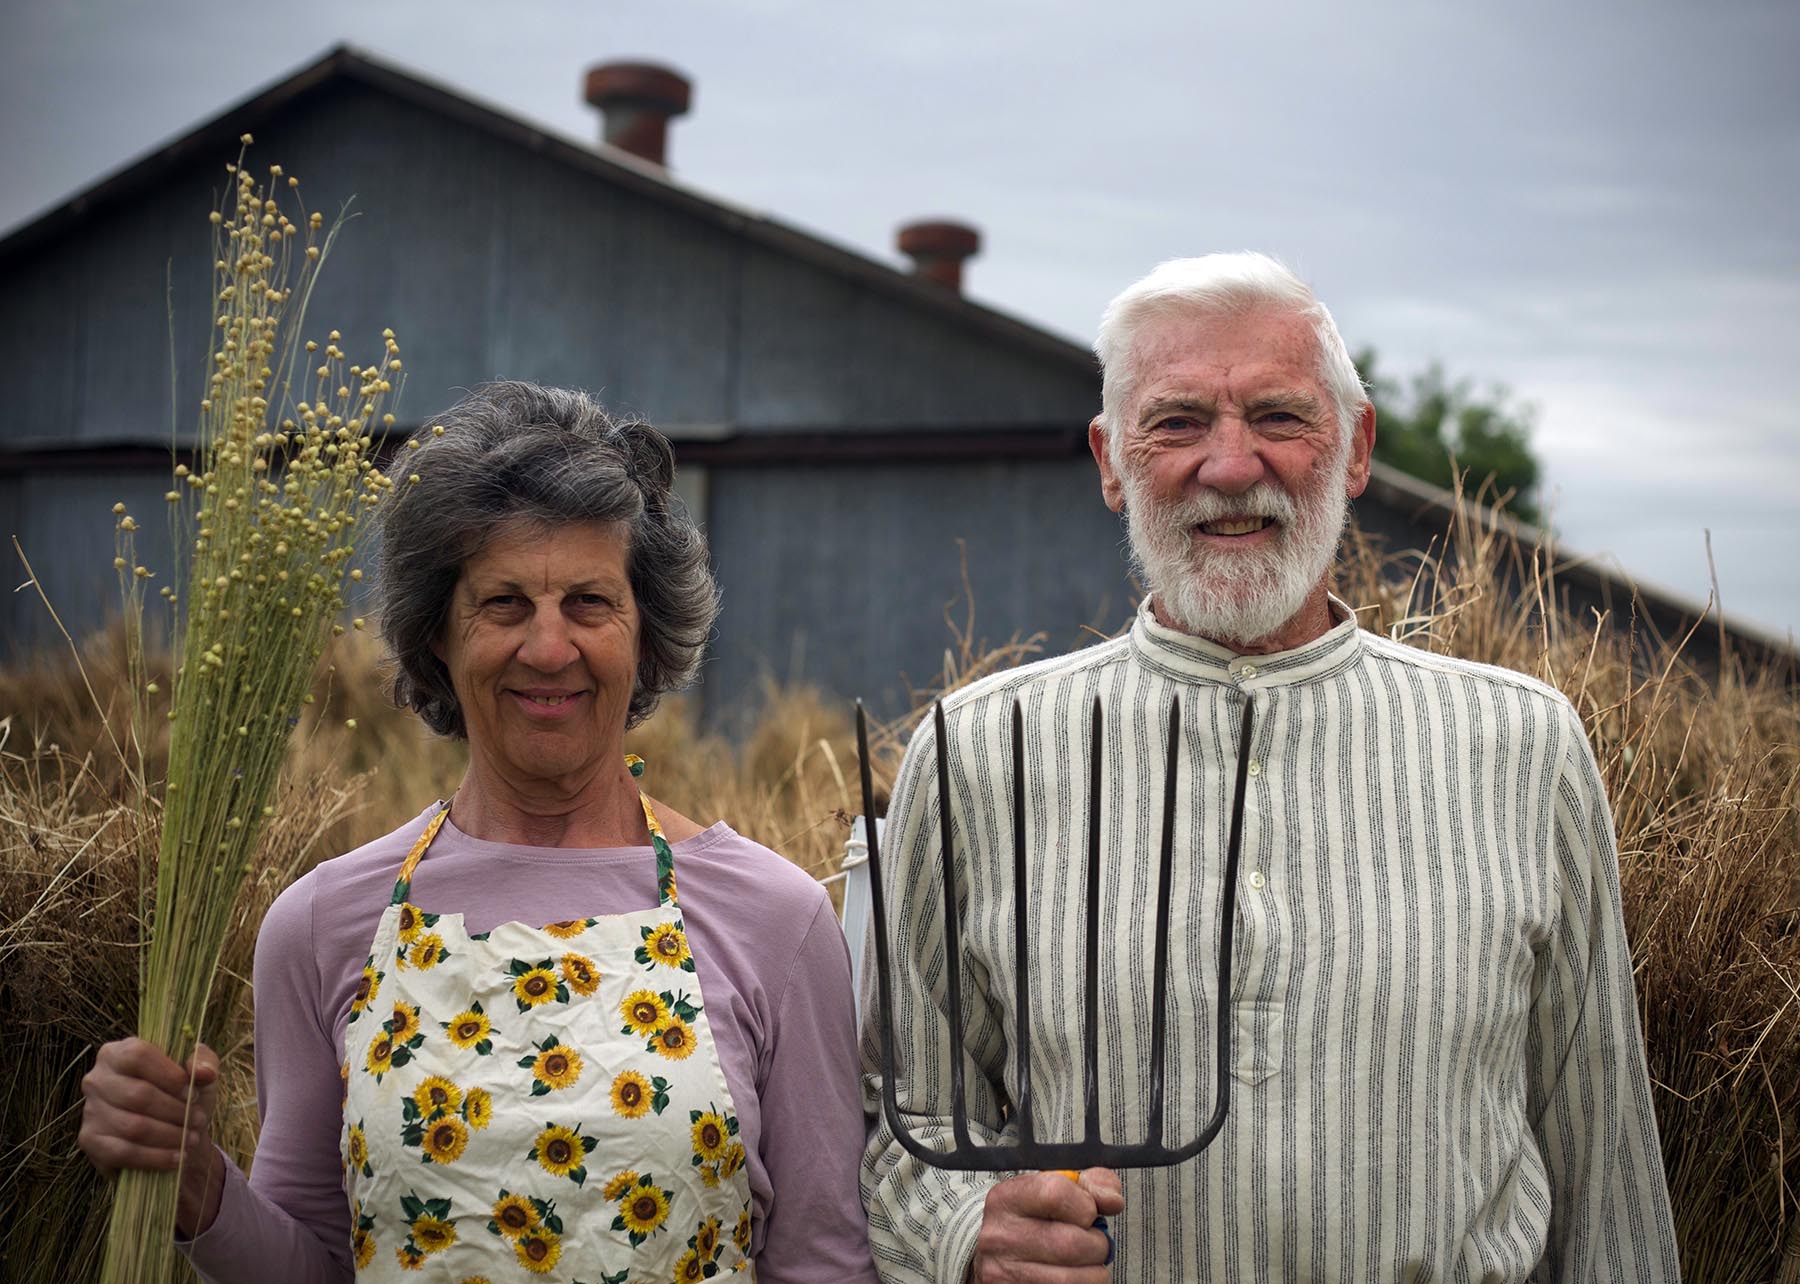 Sandy Fisher and Durl Van Alstyne living their version of American Gothic.